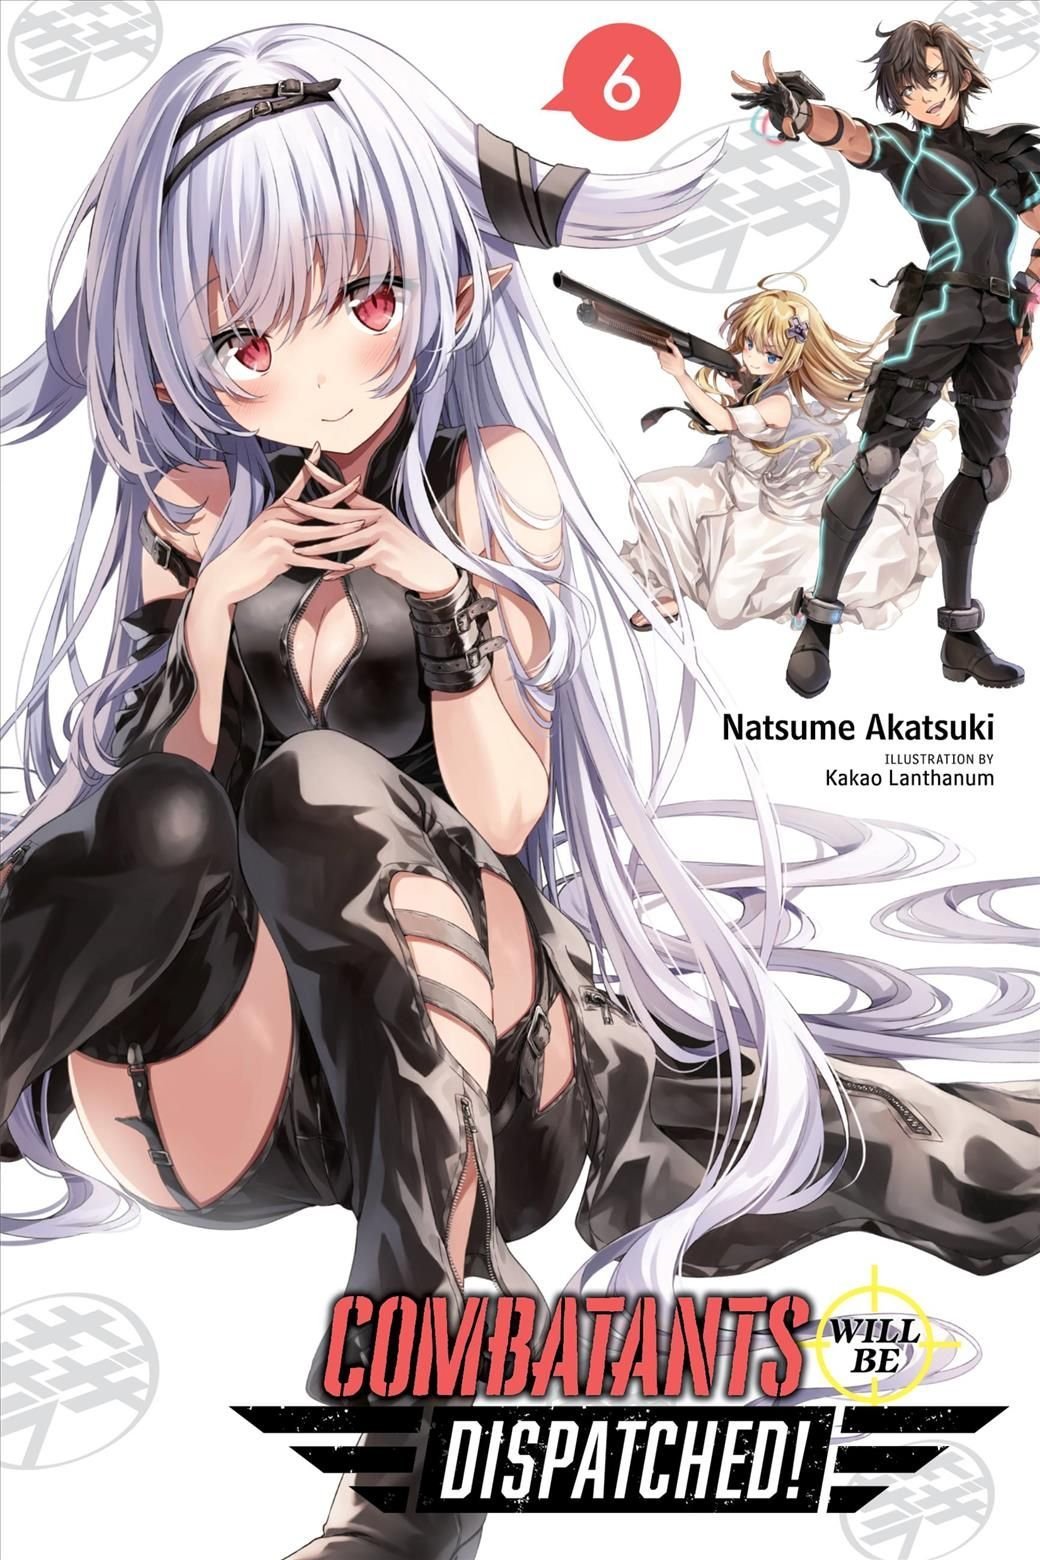 Combatants Will Be Dispatched Episode 2: Agent 6's Harem Completes - Anime  Corner